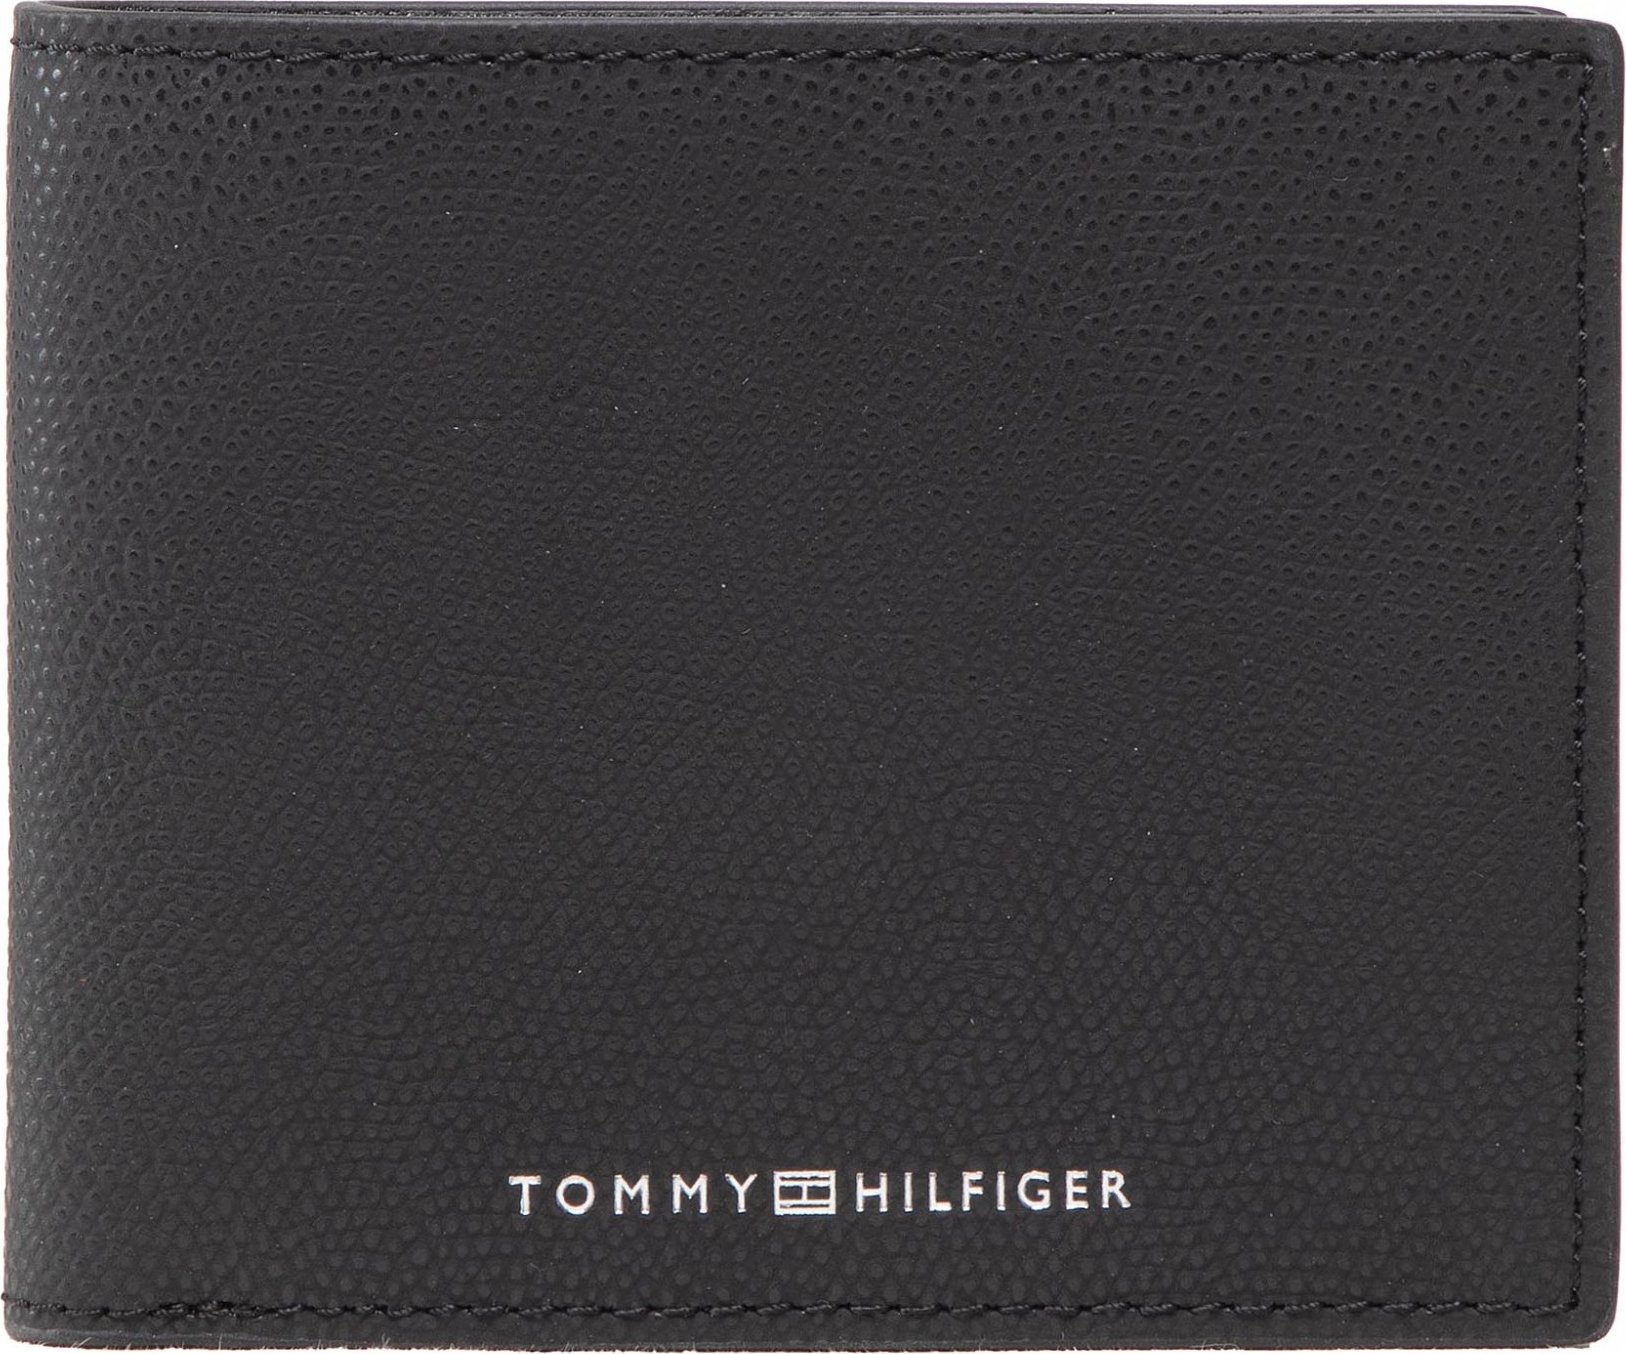 TOMMY HILFIGER Business Leather Cc And Coin AM0AM10243